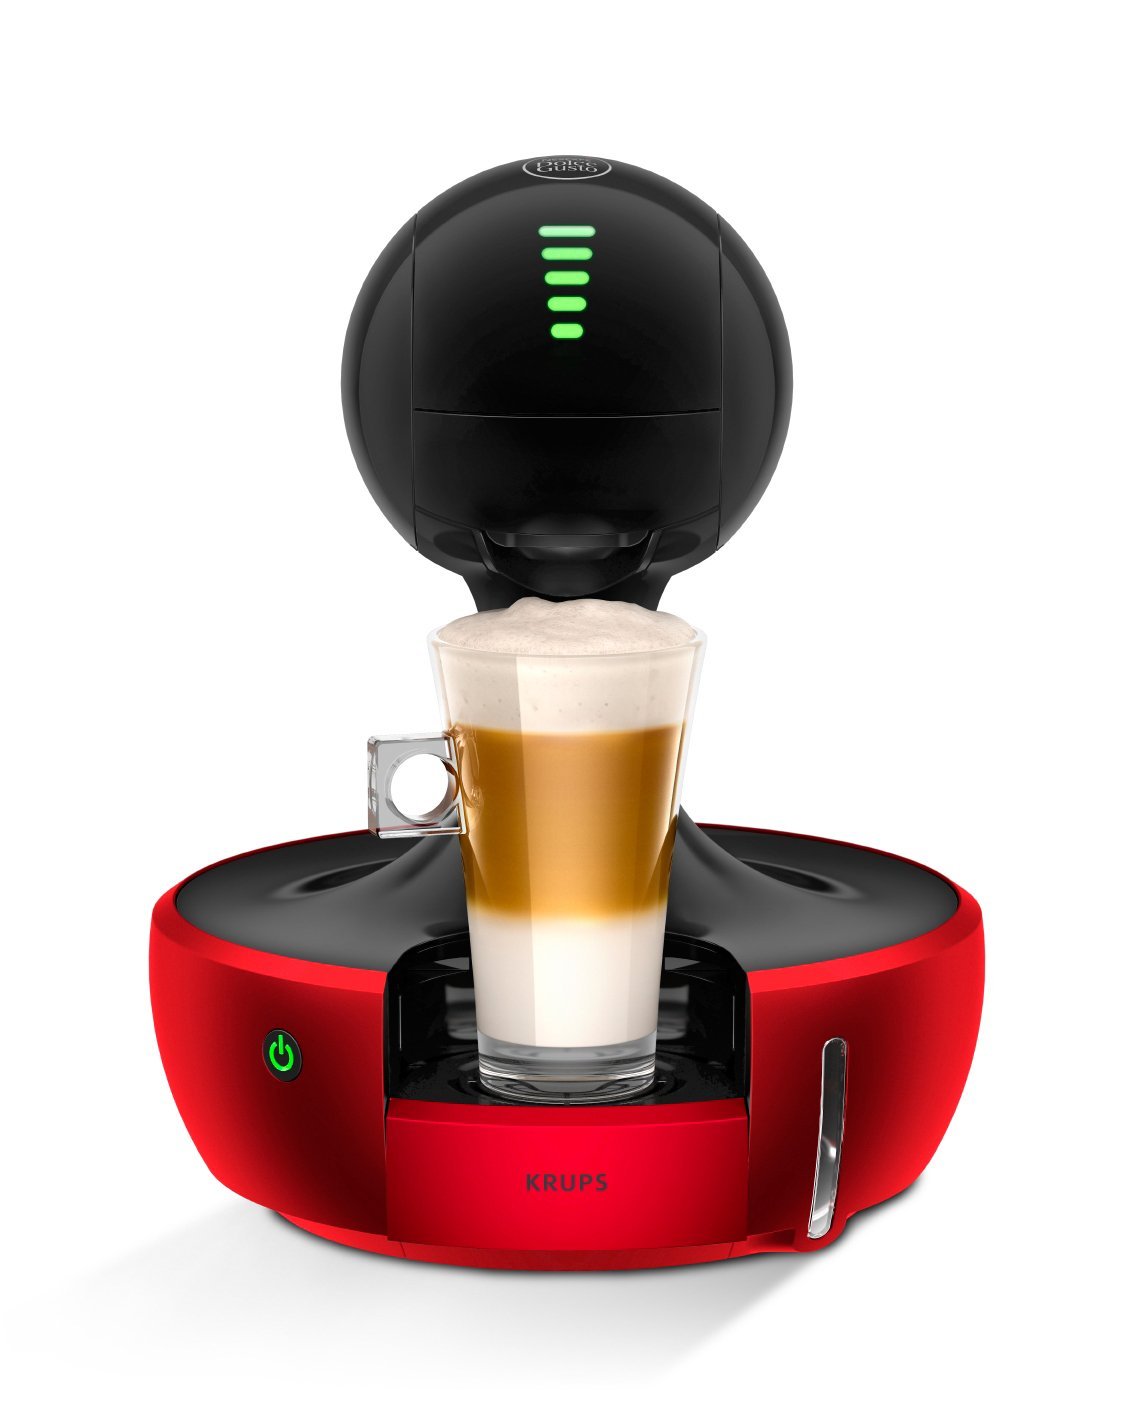 Buy Nescafe Dolce Gusto Drop Coffee Machine - Red